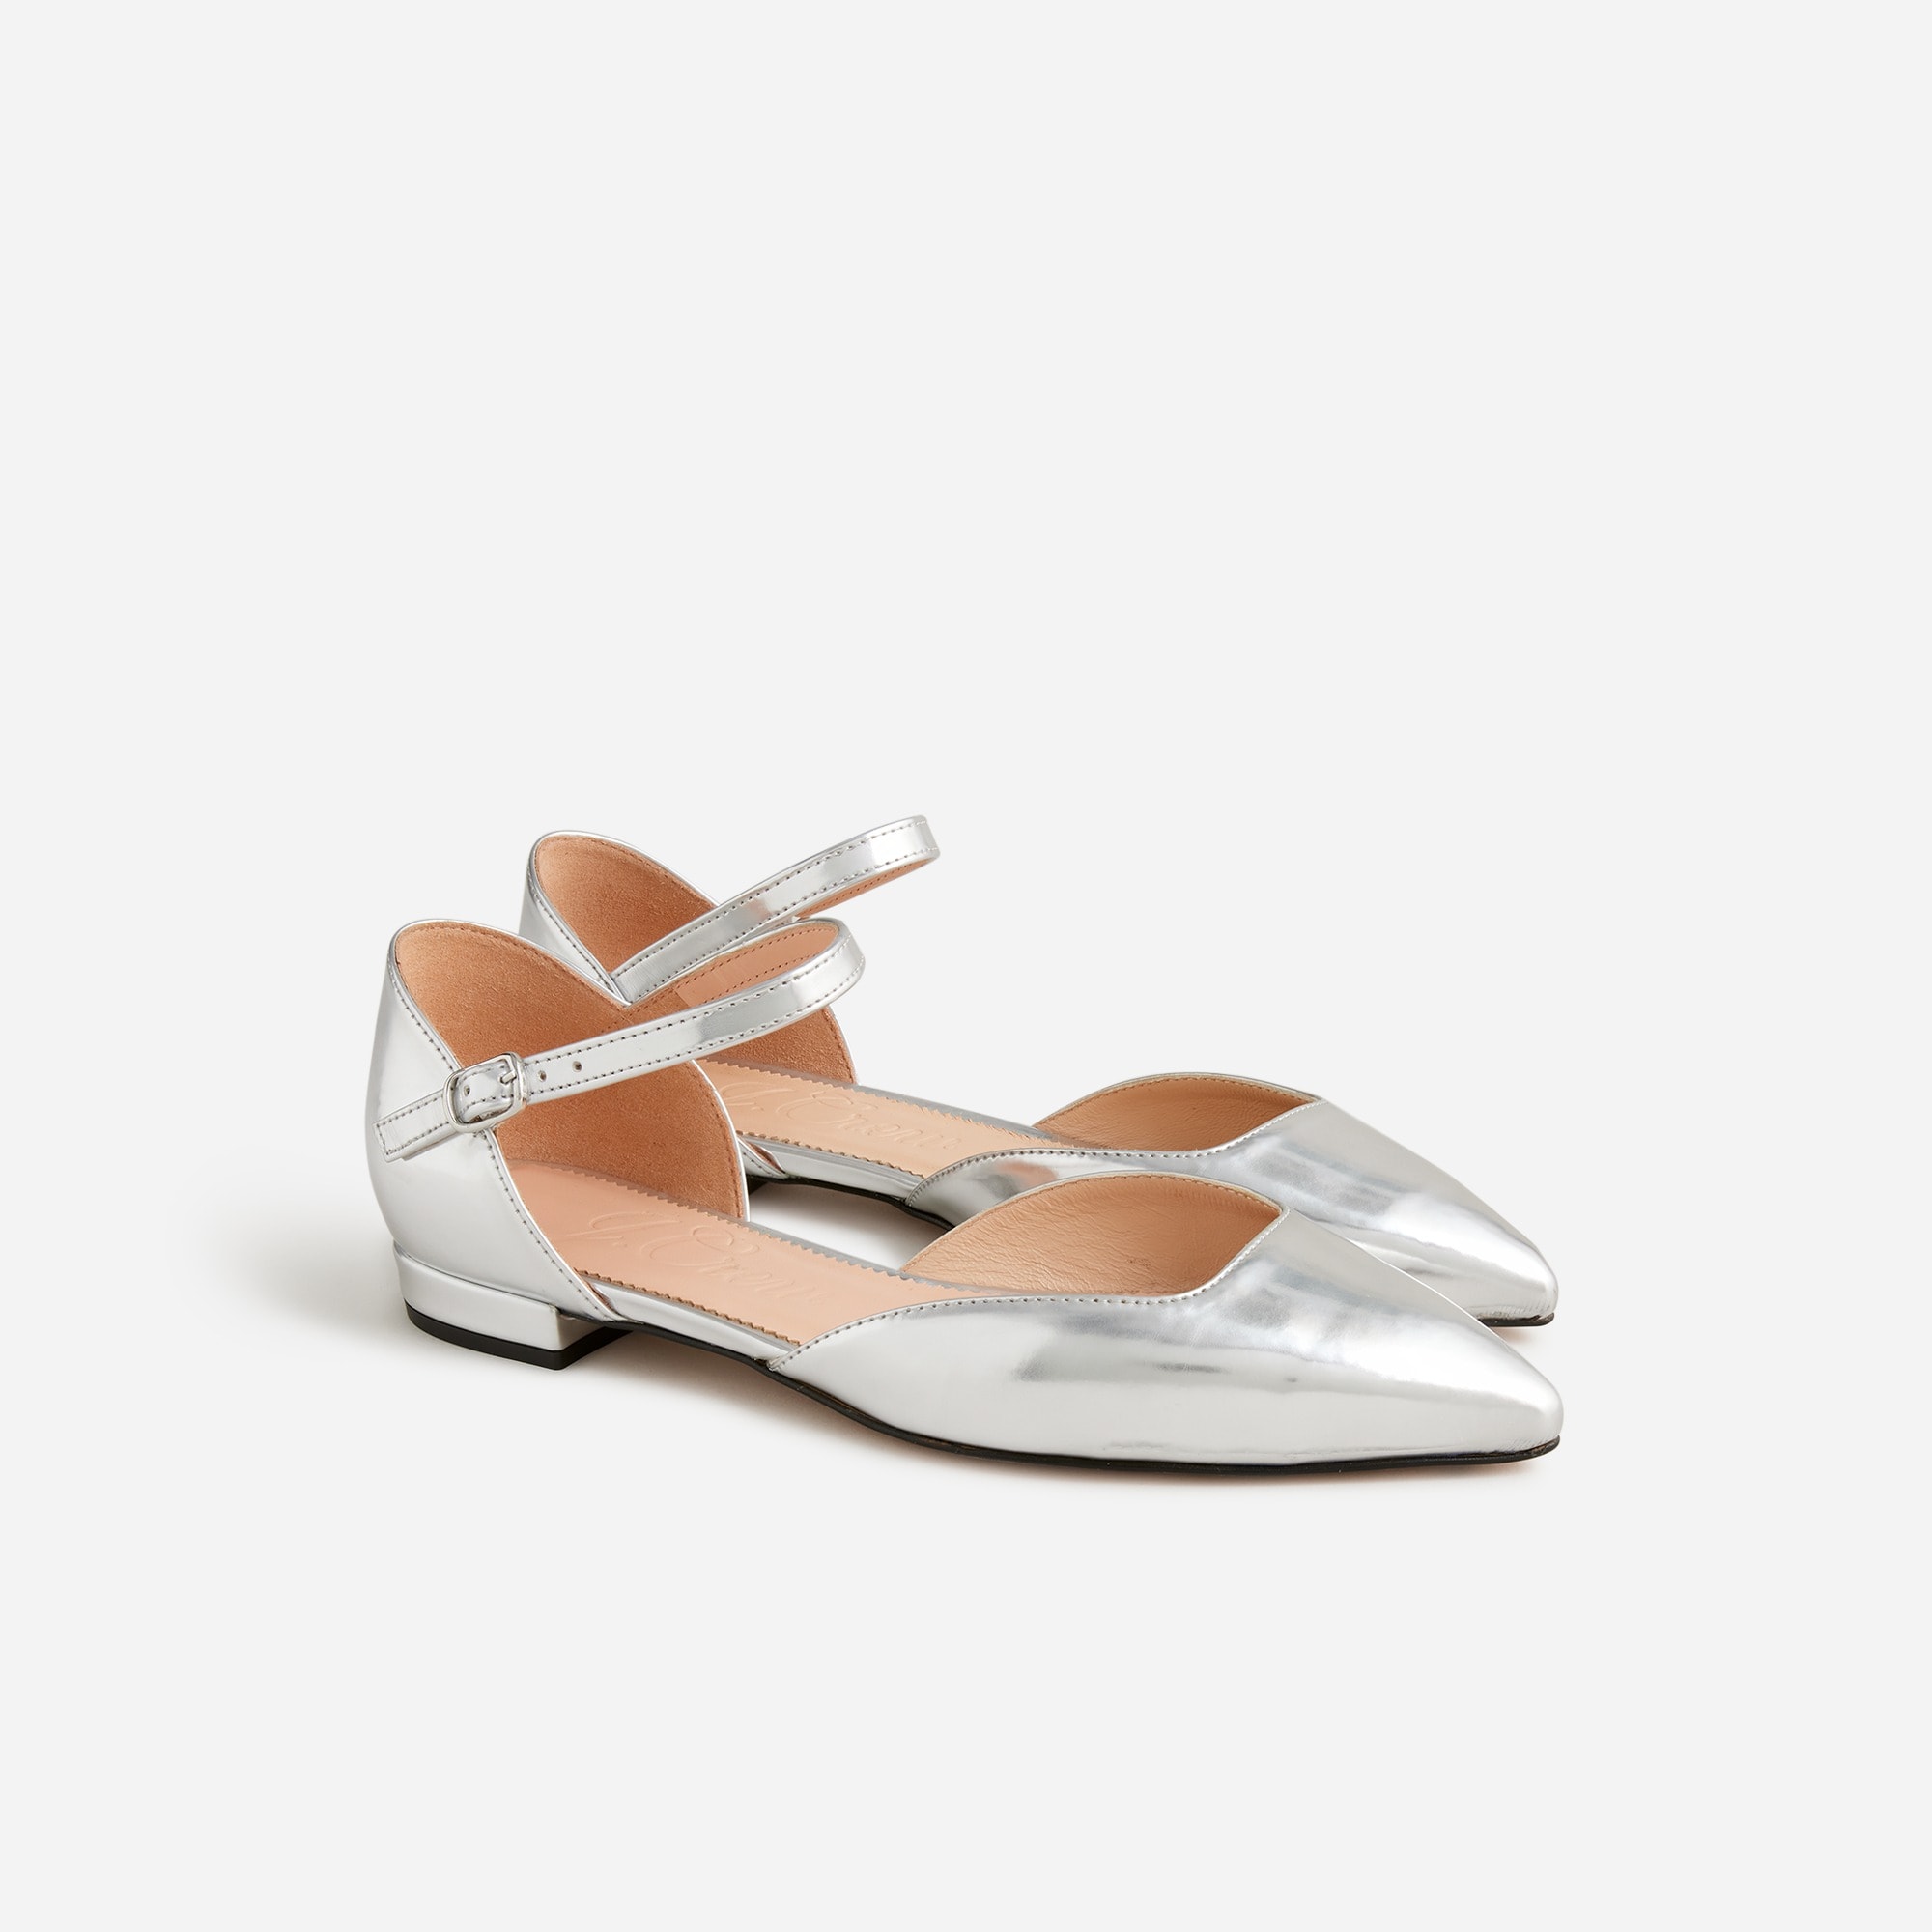  Pointed-toe flats in metallic leather